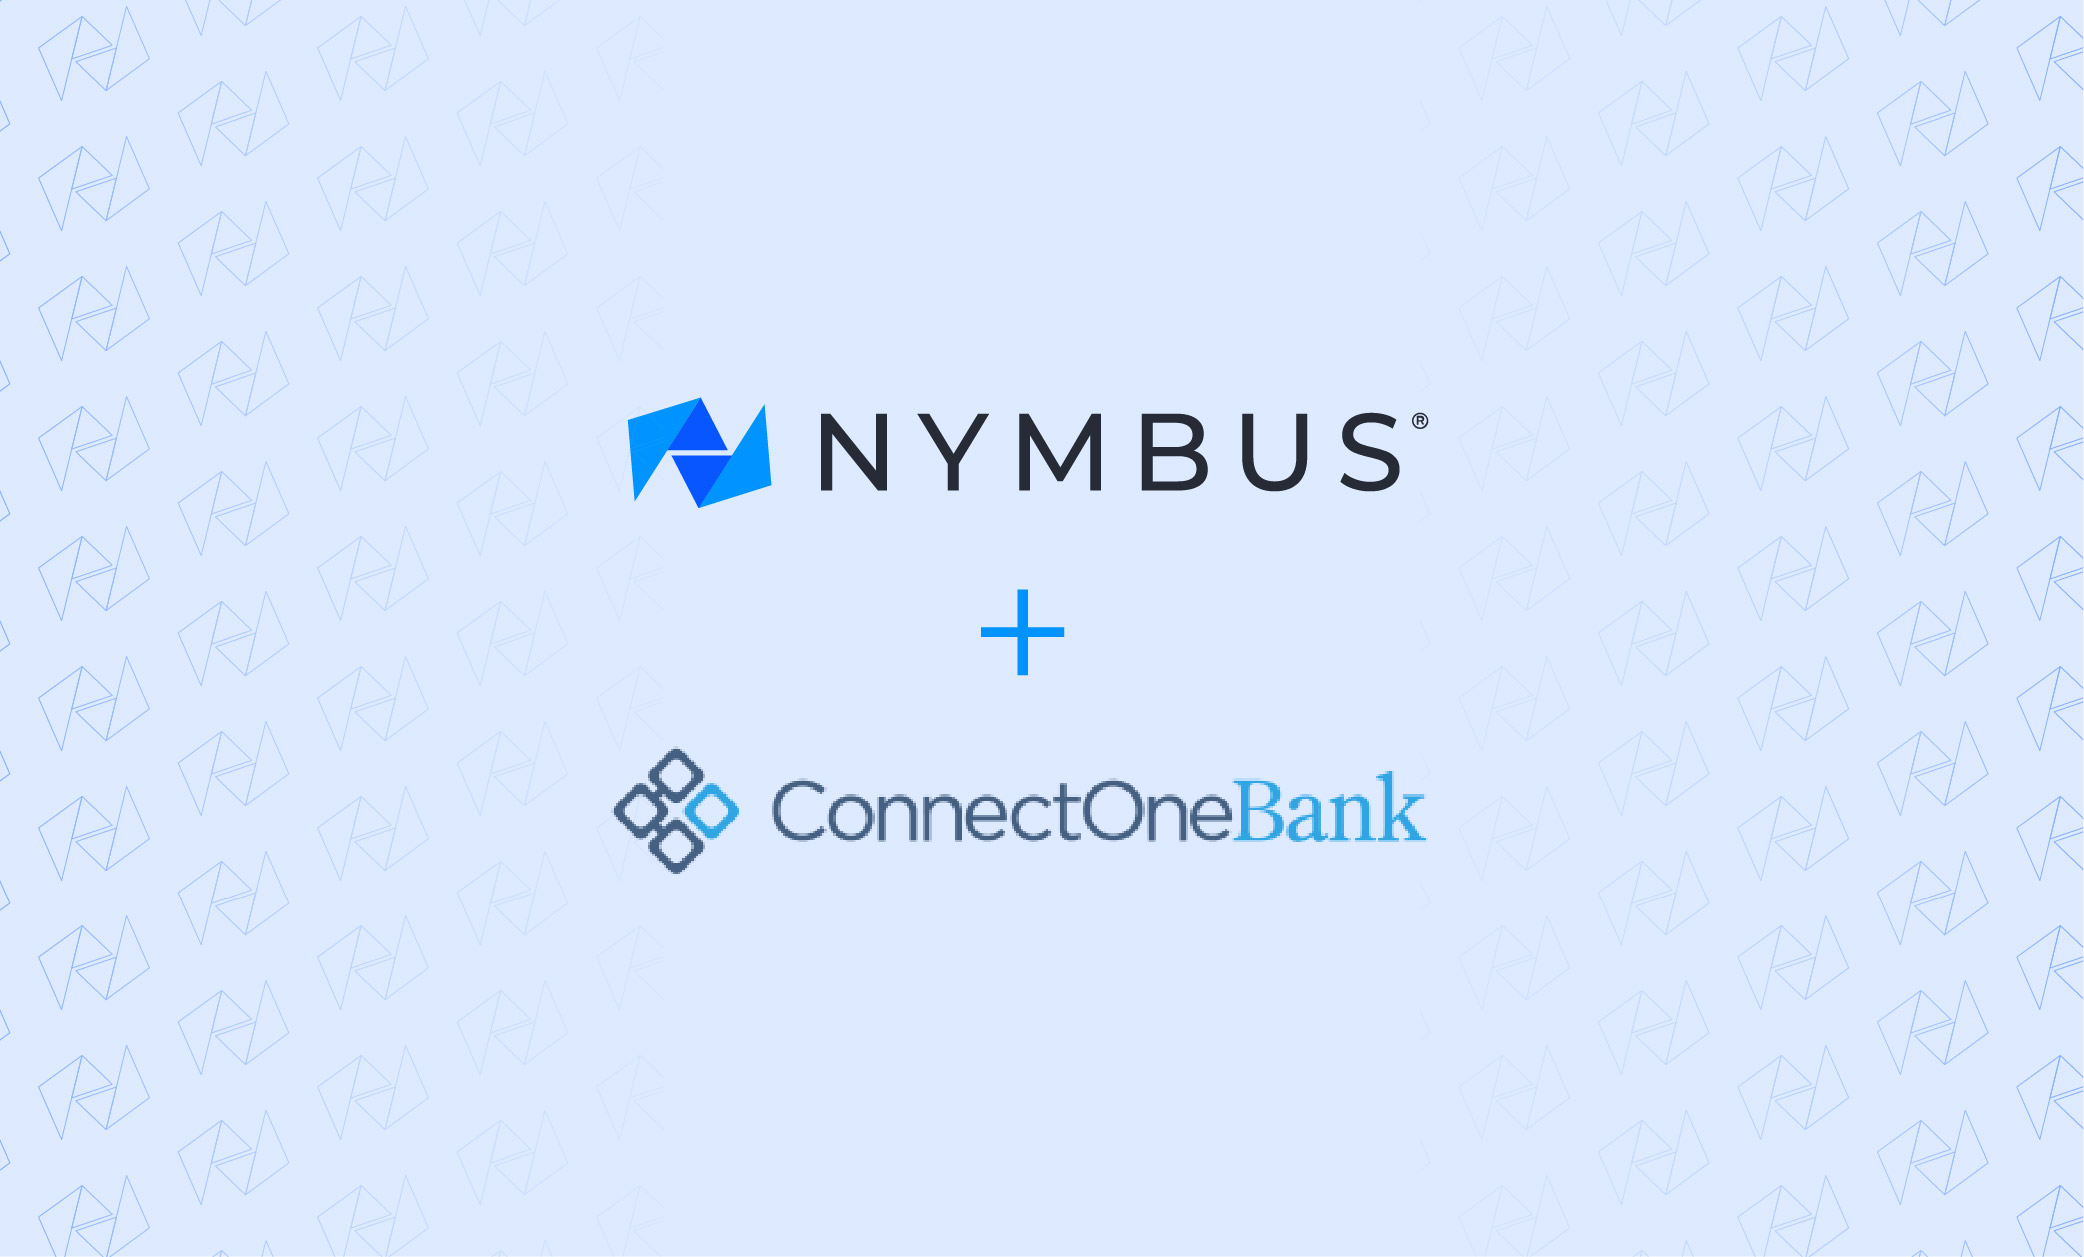 ConnectOne Bank Announces Partnership with Nymbus to Build Bespoke Banking Solution